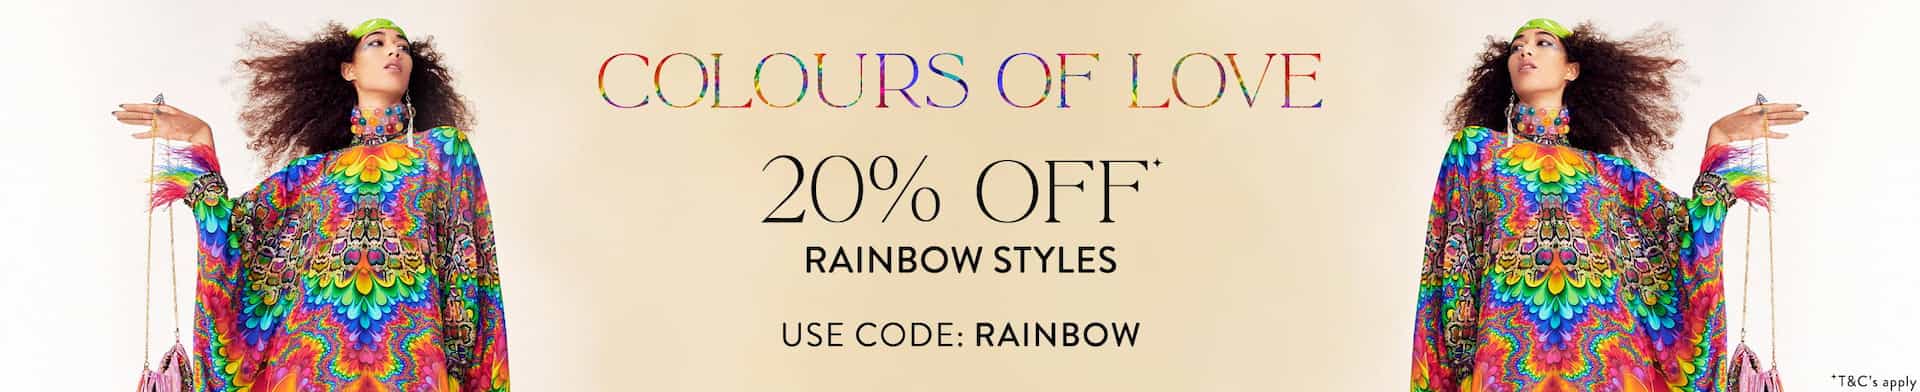 Camilla Take extra 20% OFF selected Rainbow styles with discount code